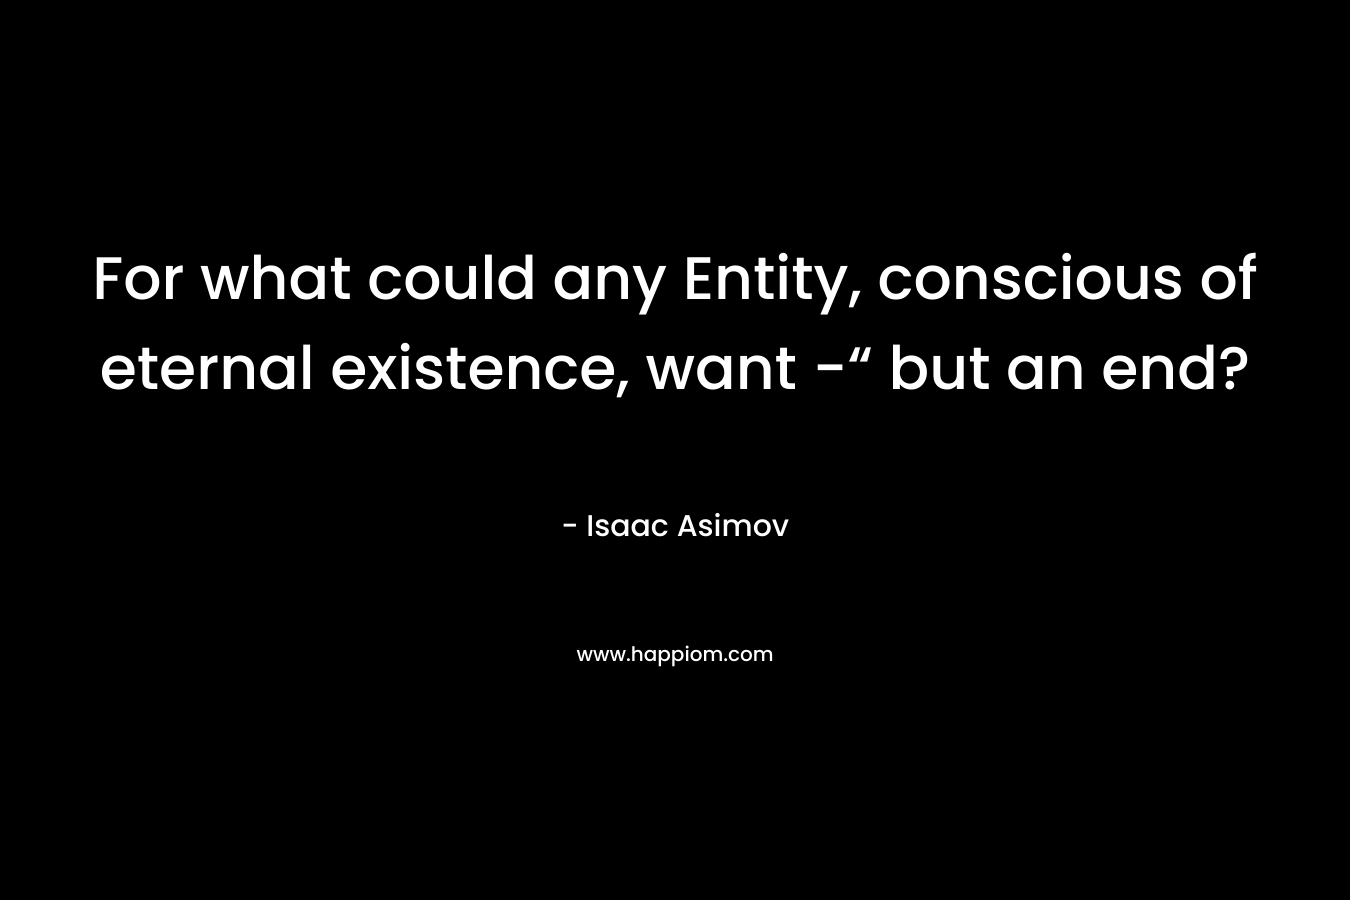 For what could any Entity, conscious of eternal existence, want -“ but an end?